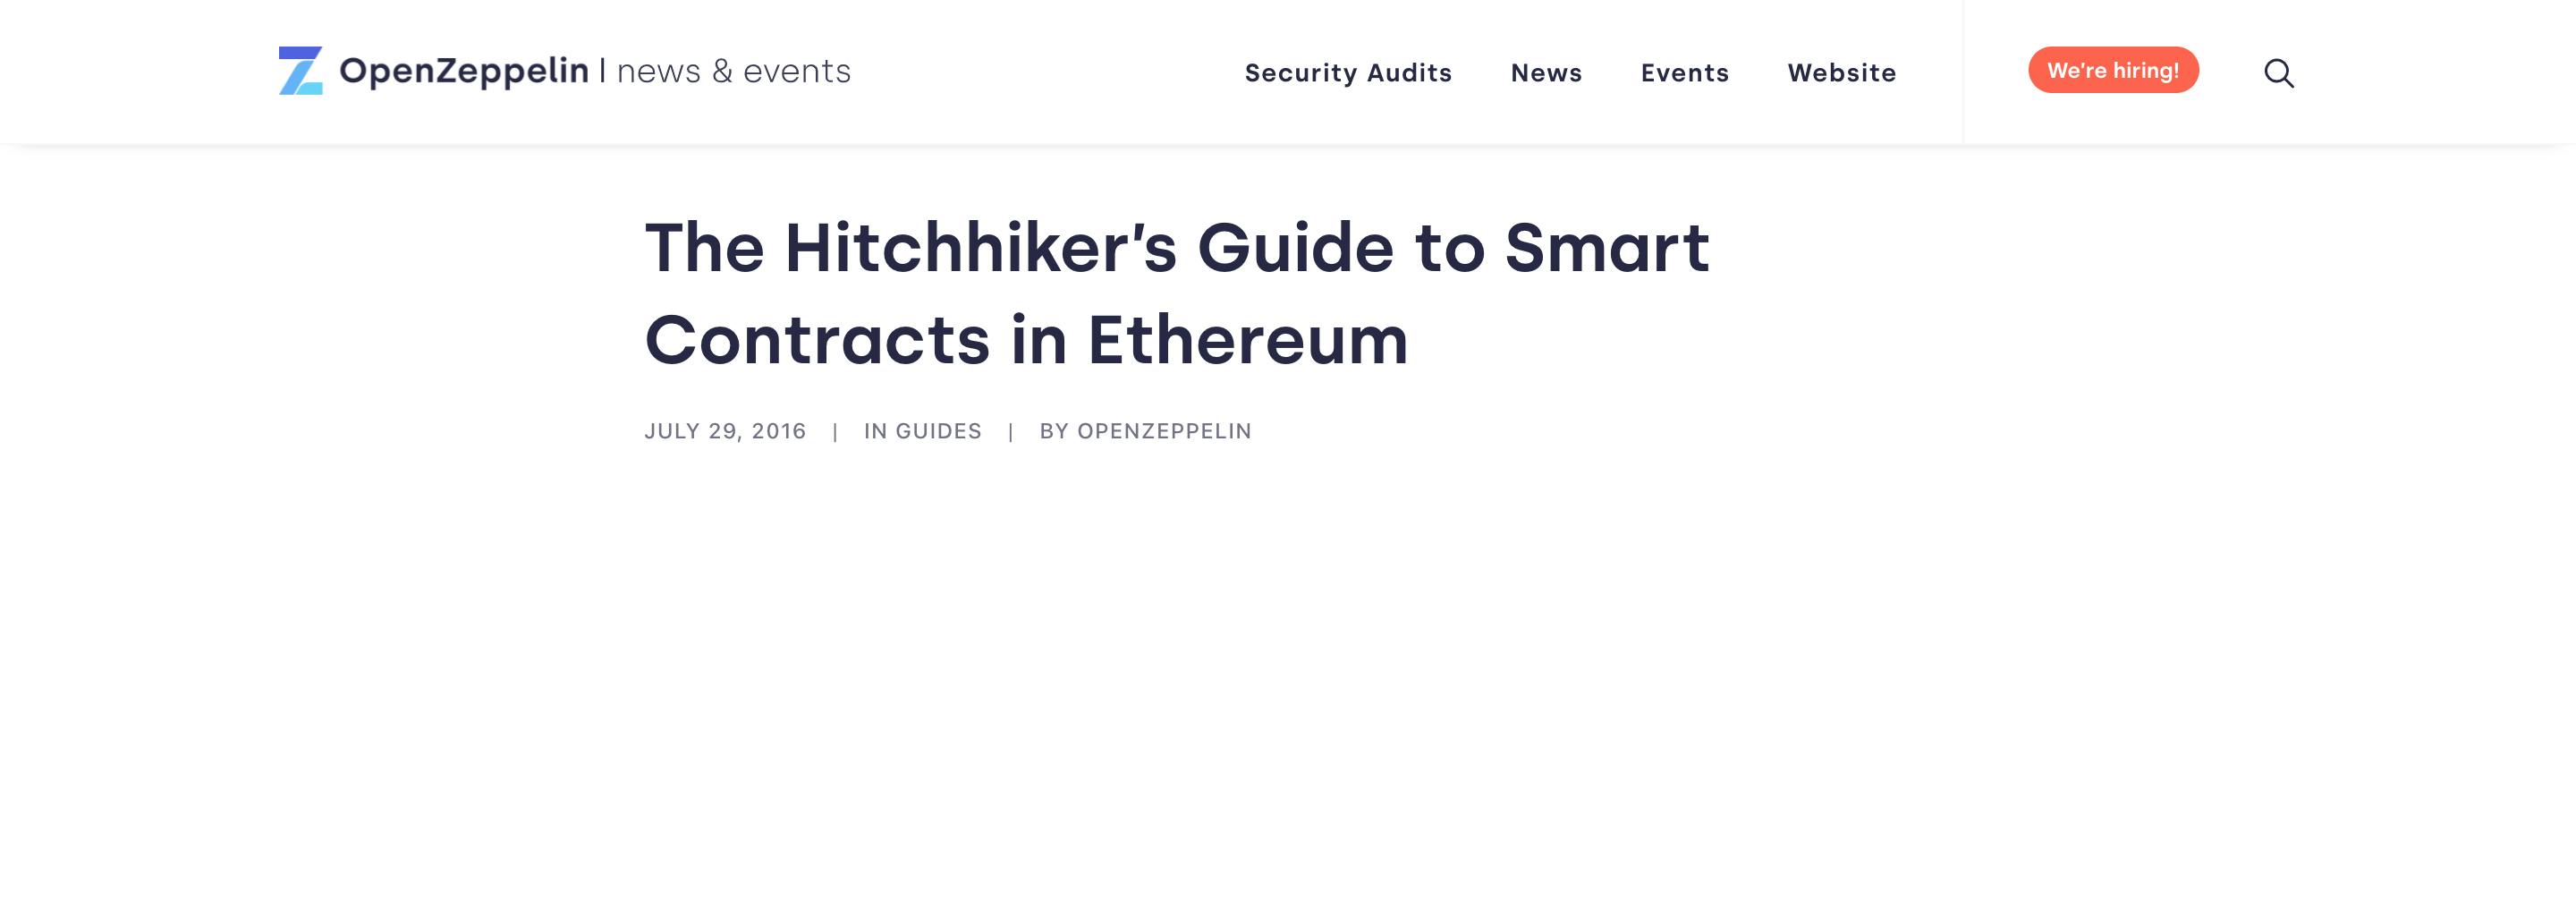 The Hitchhiker's Guide to Smart Contracts in Ethereum